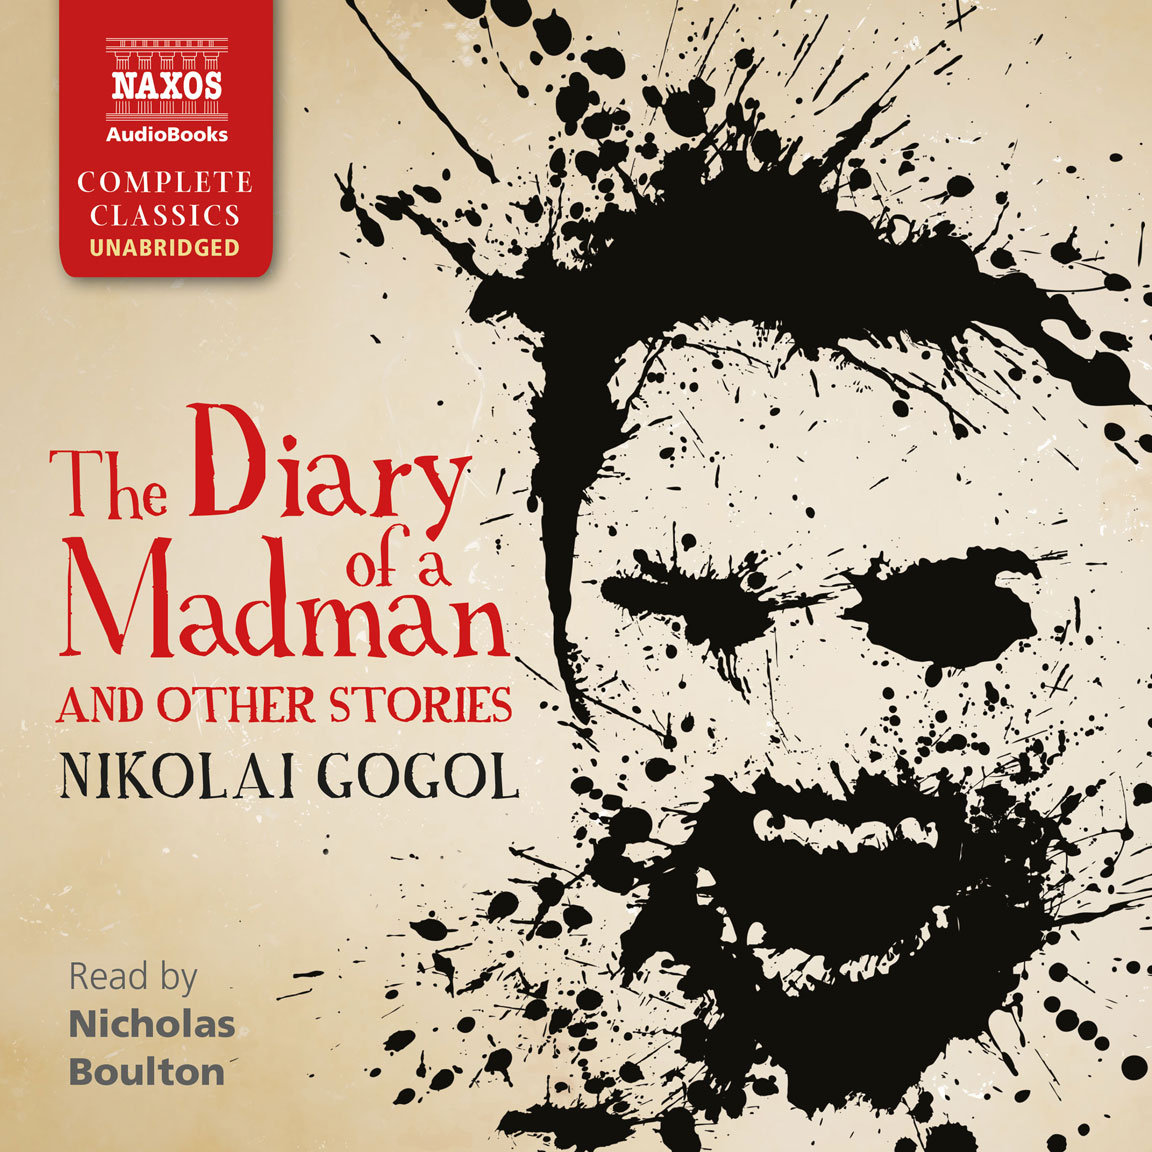 The Diary of a Madman and other stories (unabridged)